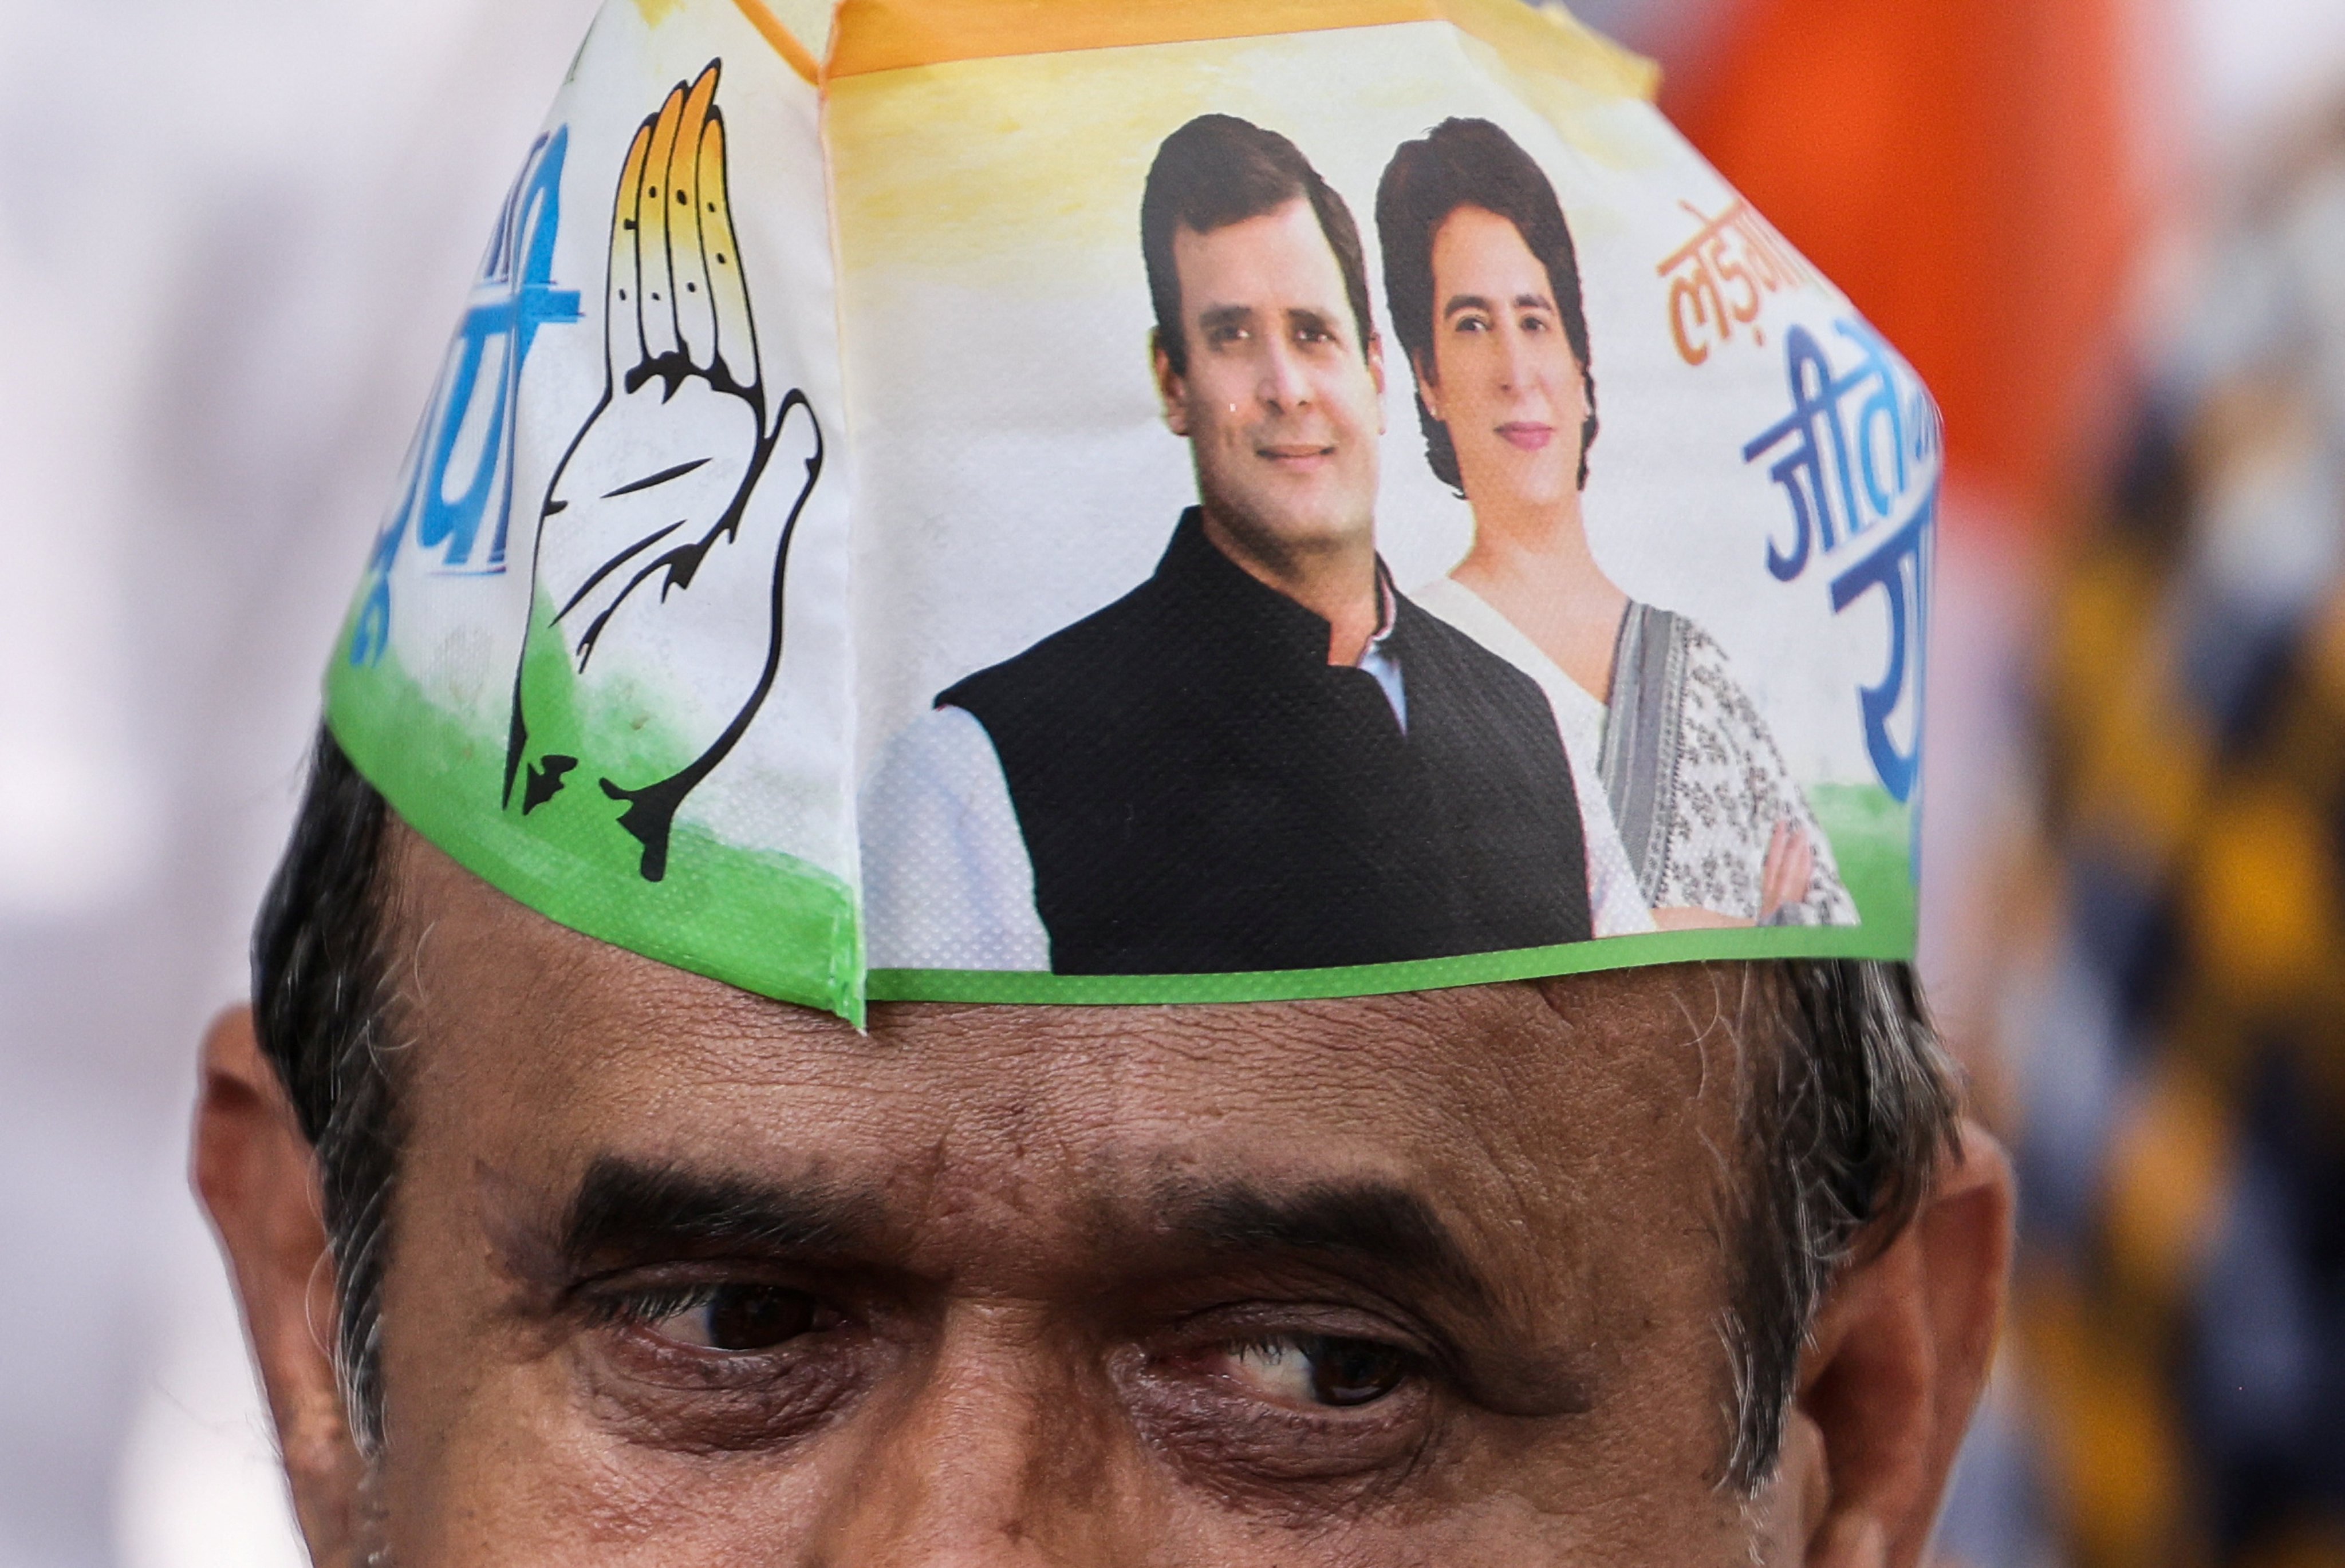 A supporter wears a cap with the picture of Rahul Gandhi, a senior leader of India’s main opposition Congress party, and his sister Priyanka Gandhi Vadra, in Raebareli, India on May 3. Photo: Reuters